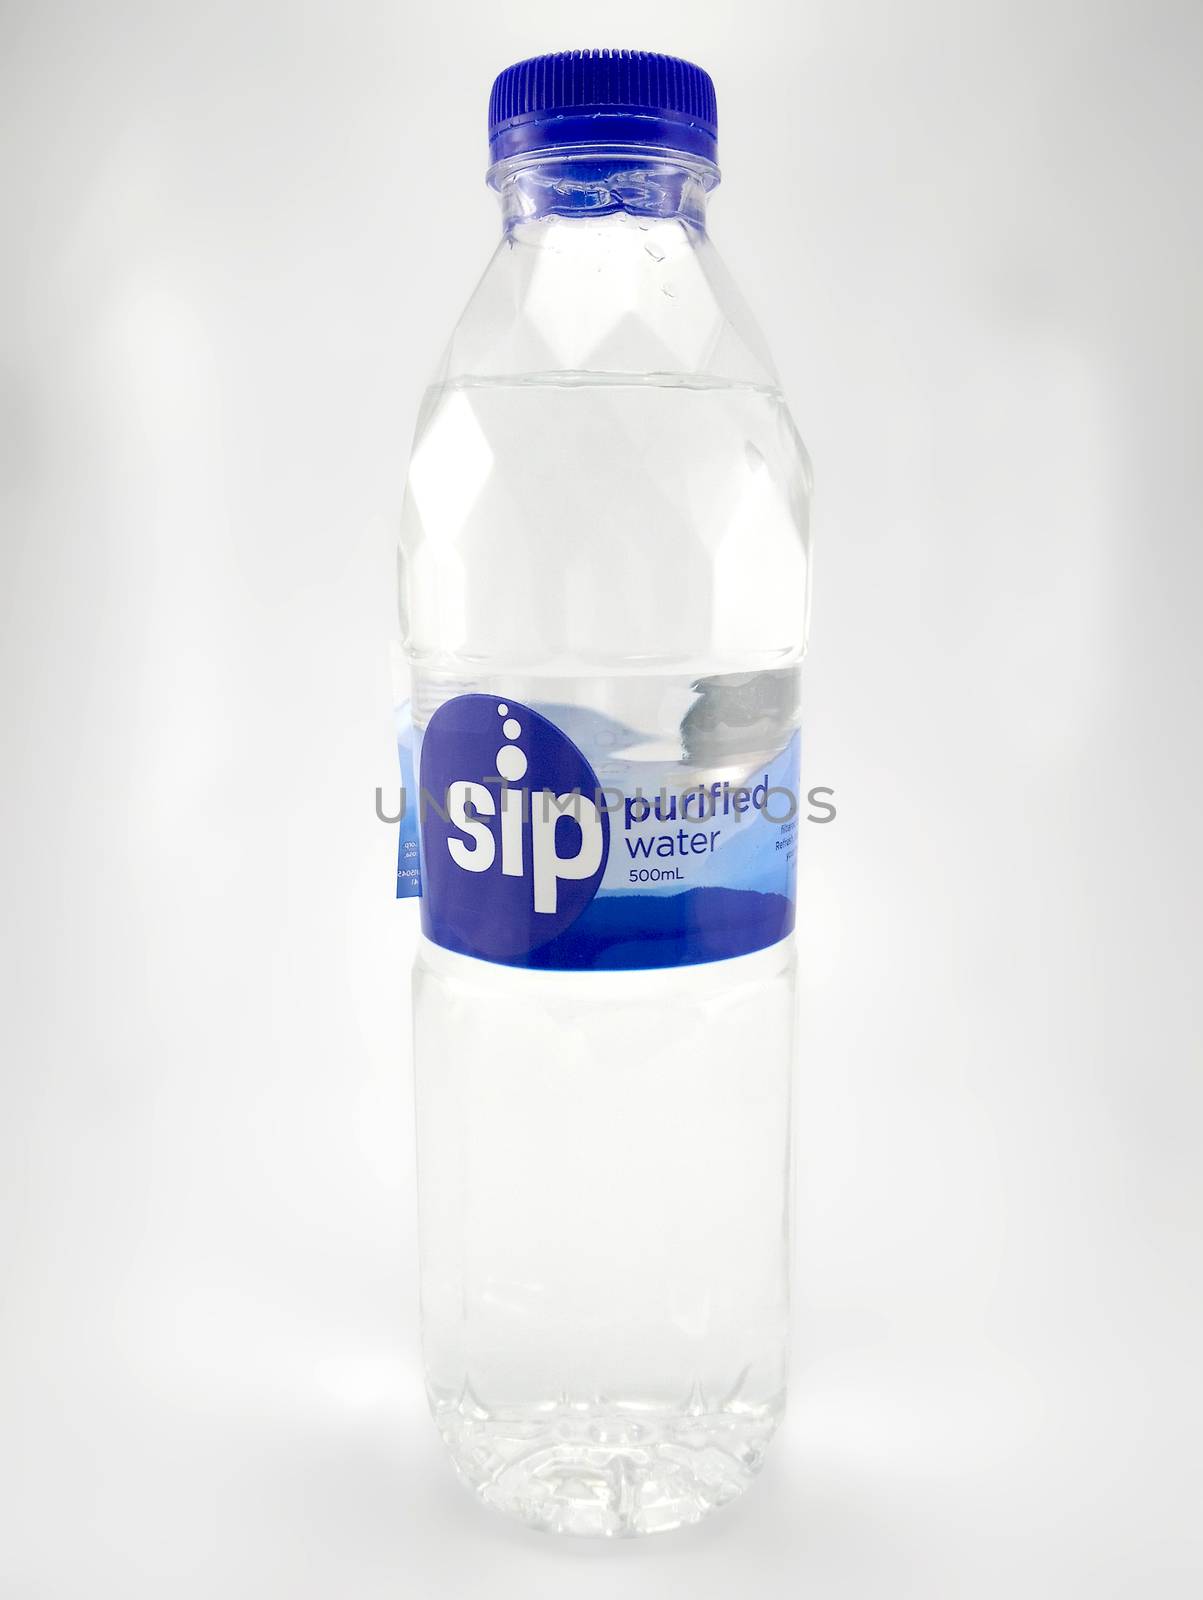 Sip purified water bottle in Manila, Philippines by imwaltersy